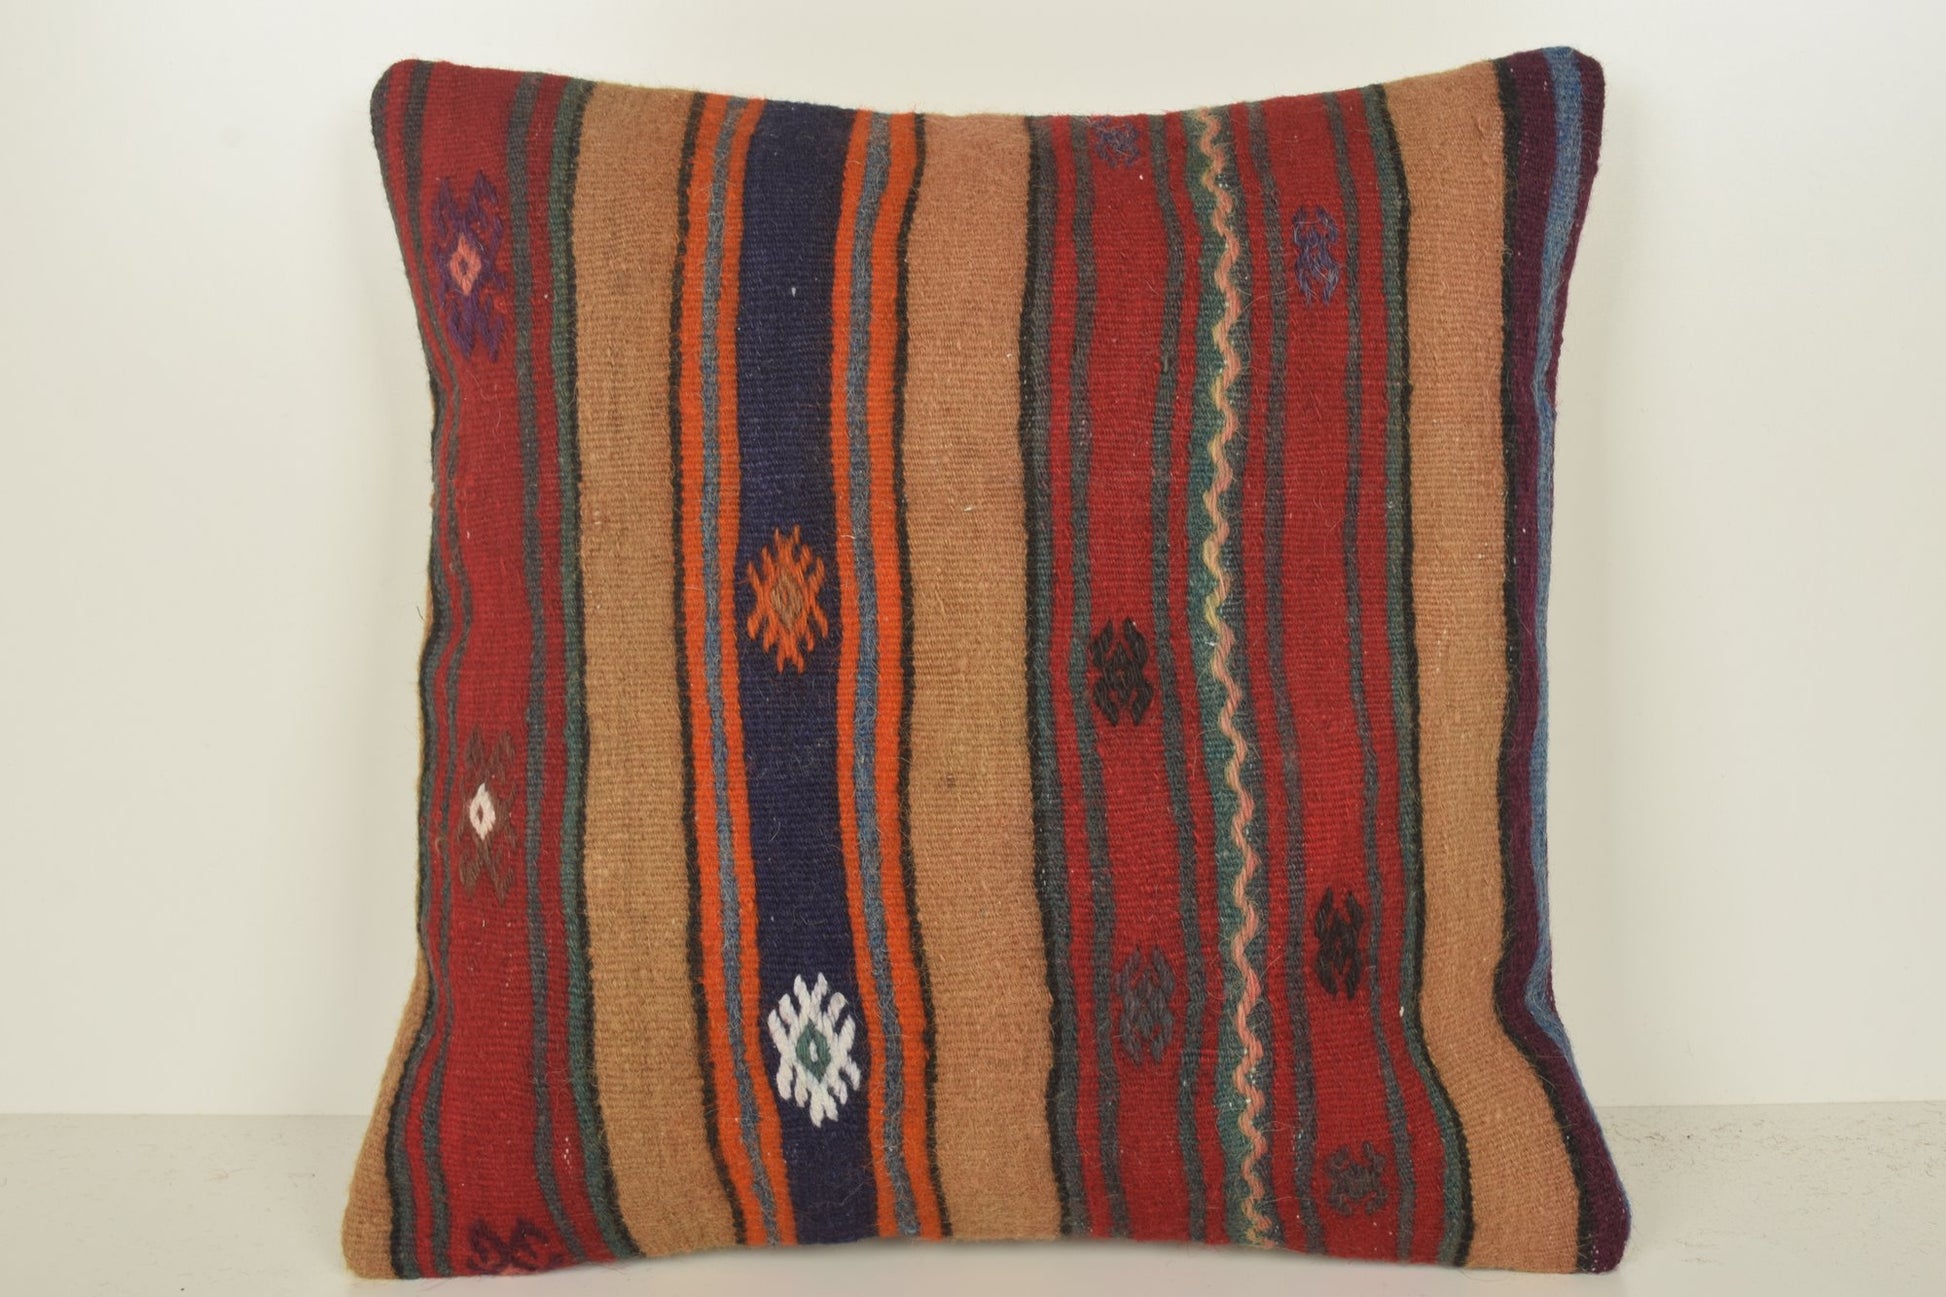 Kilim Pillow Covers made in Turkey C01346 18x18 Western Bedding Aztec